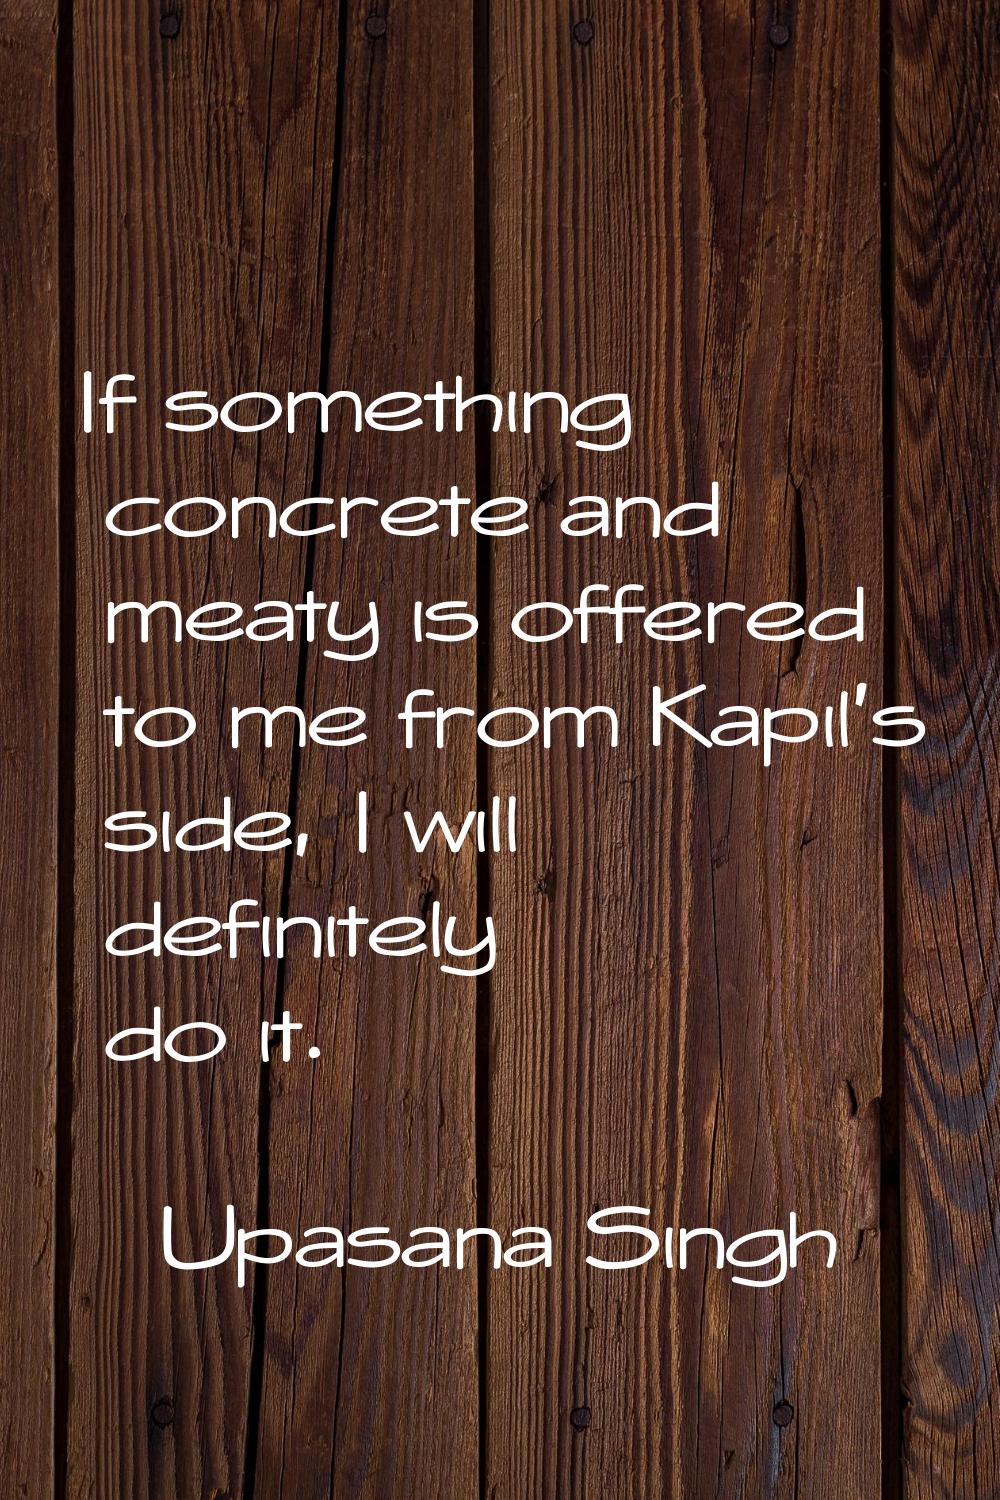 If something concrete and meaty is offered to me from Kapil's side, I will definitely do it.